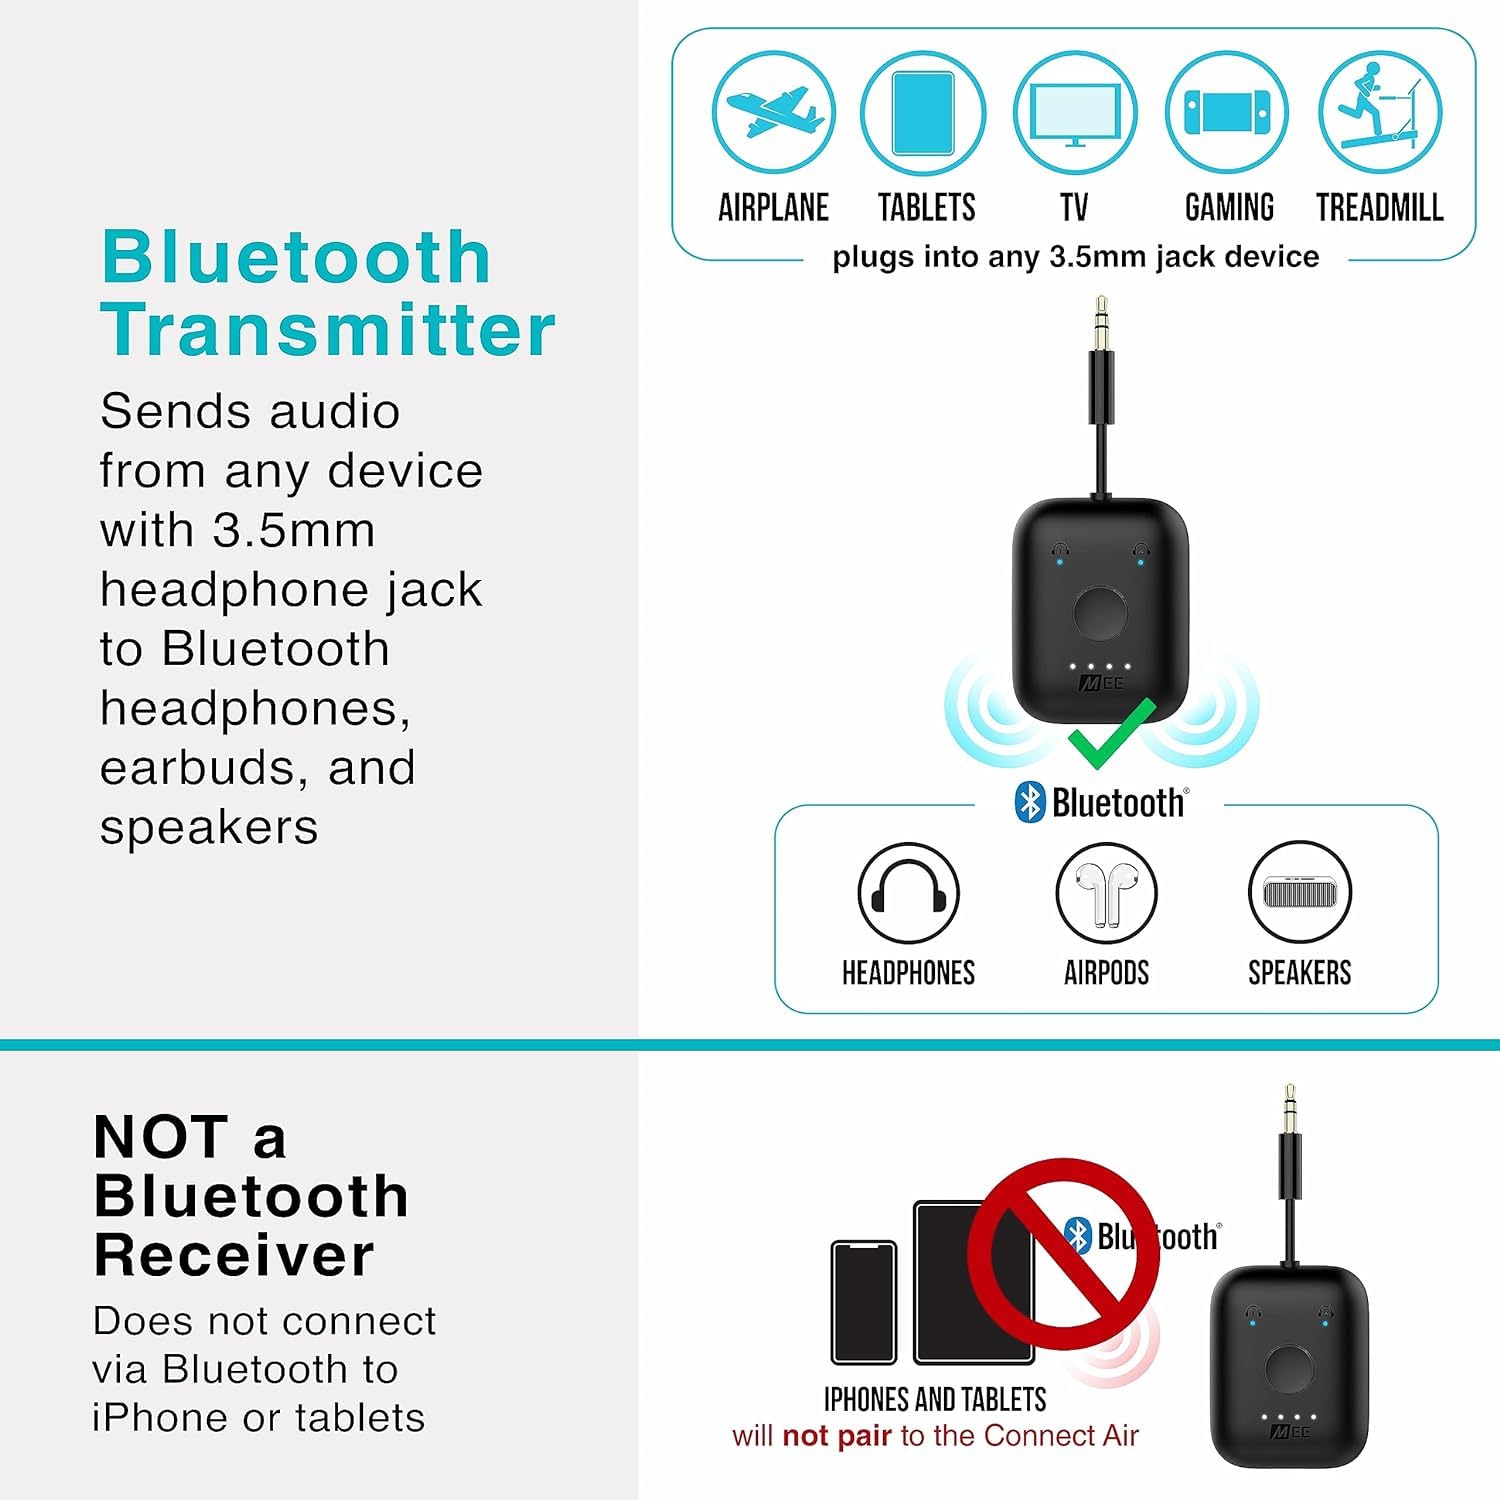 MEE audio Connect Air (2 PACK) in-Flight Bluetooth Wireless Audio Transmitter Adapter for up to 2 AirPods/Other Headphones; Works with All 3.5mm Aux Jacks on Airplanes, Gym, TVs, & Gaming, Black&White